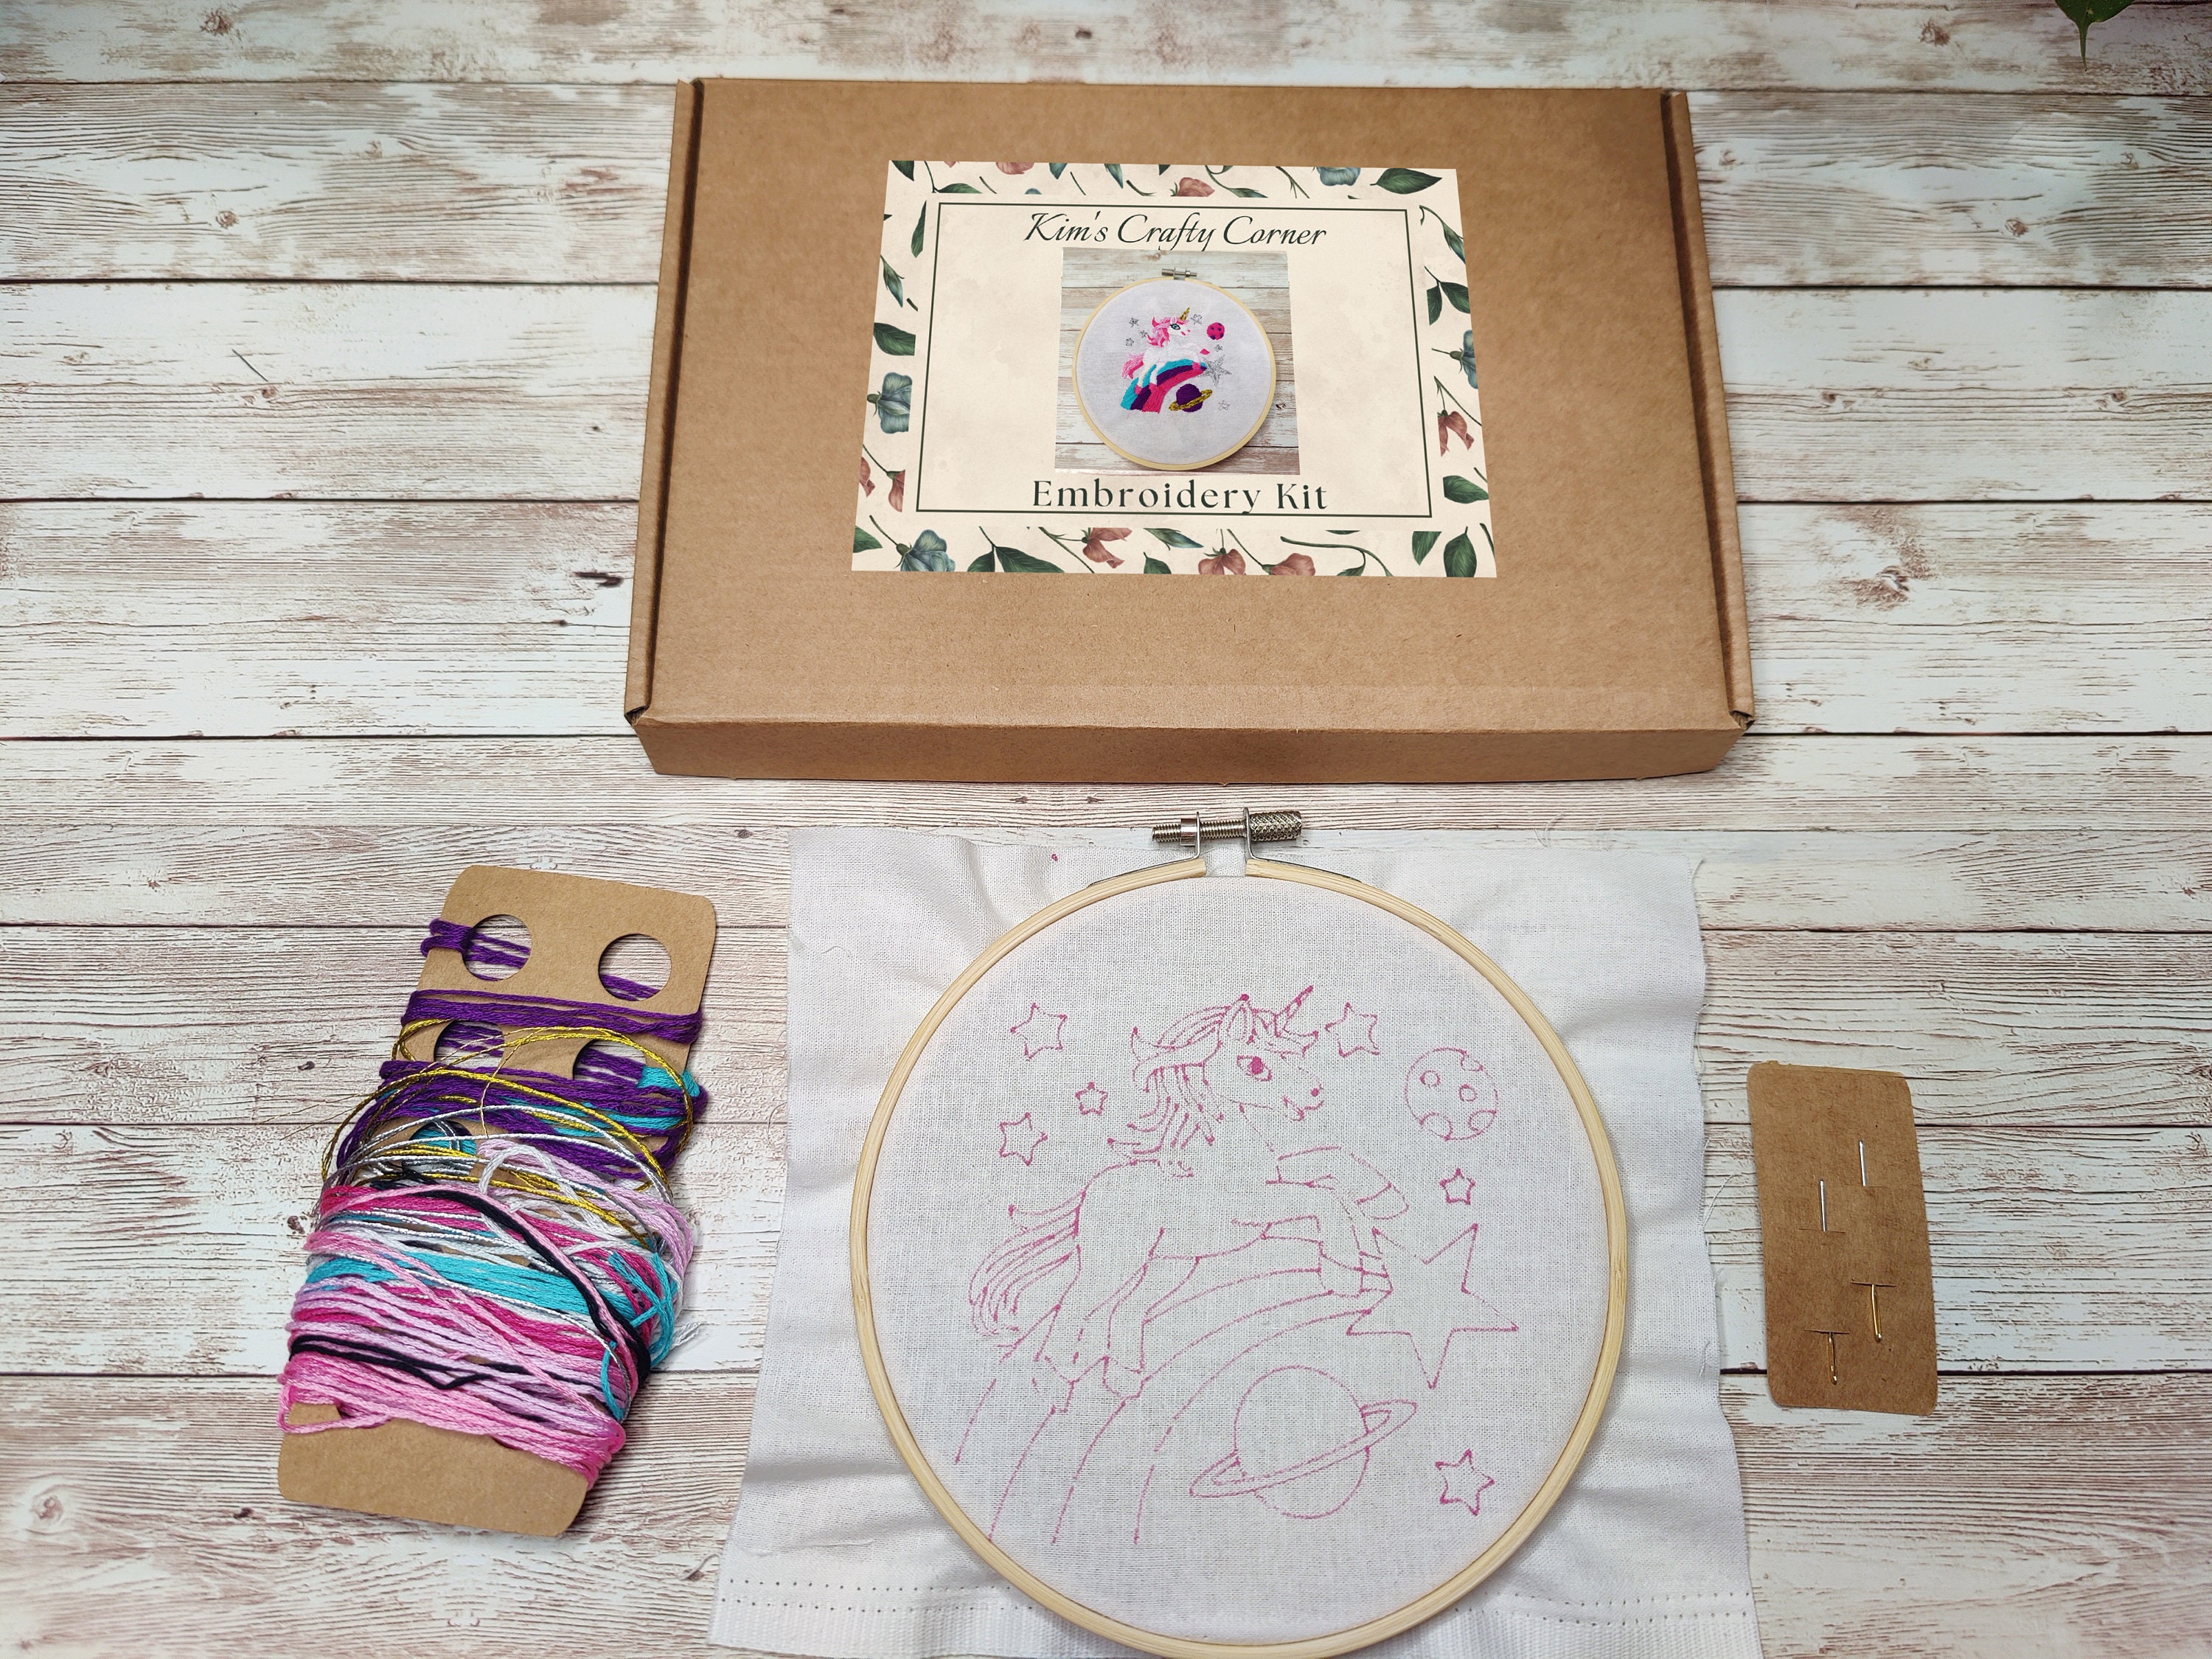 Embroidery Kit for Beginners, Pre Printed Embroidery Kit for Adults and Kids,  6 Hoop Floral Woman Hand Embroidery Kits UK, Craft Gift 